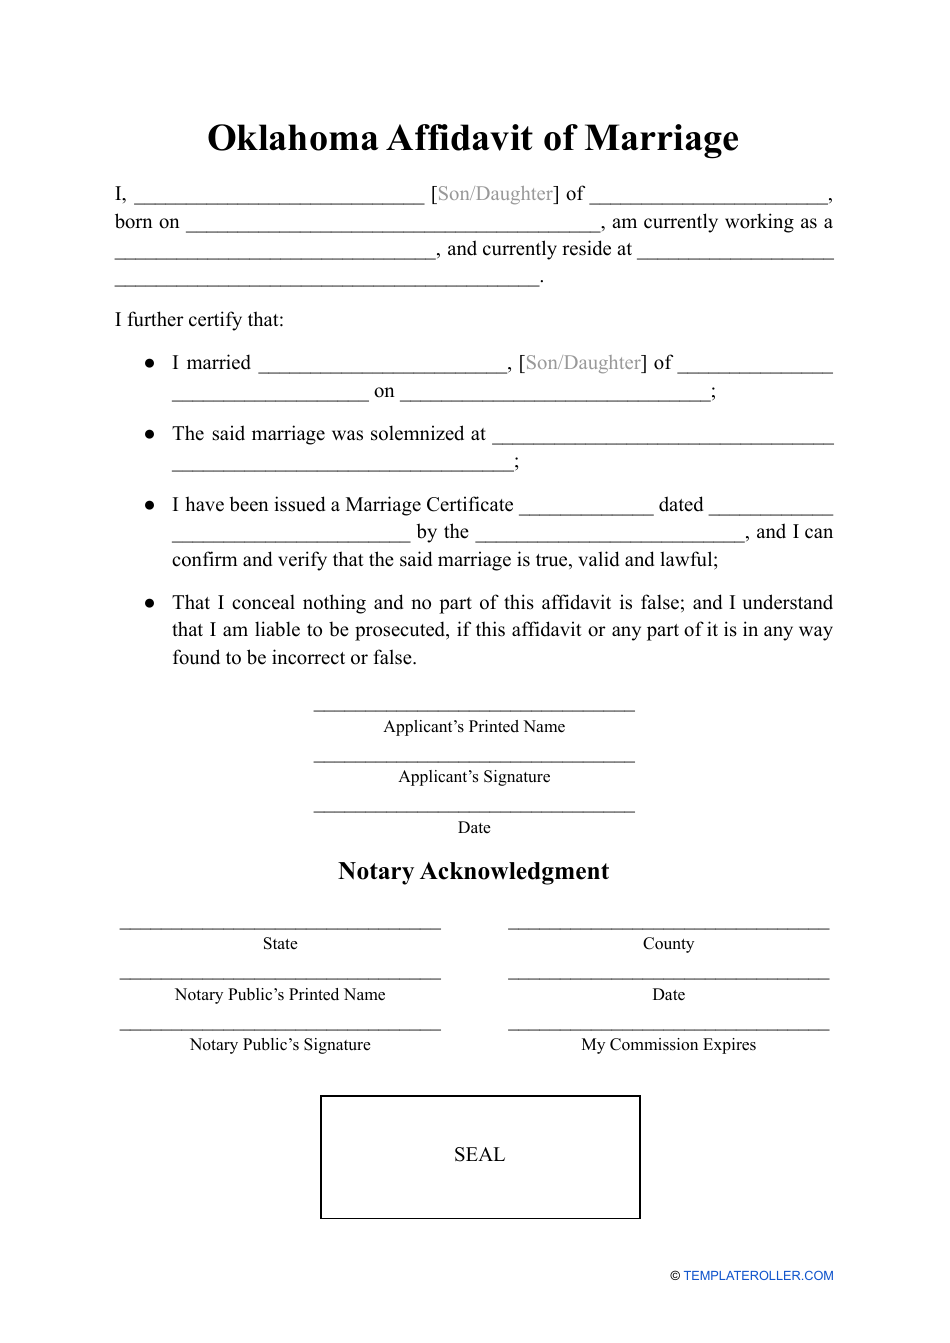 Oklahoma Affidavit Of Marriage Fill Out Sign Online And Download Pdf Templateroller 2762